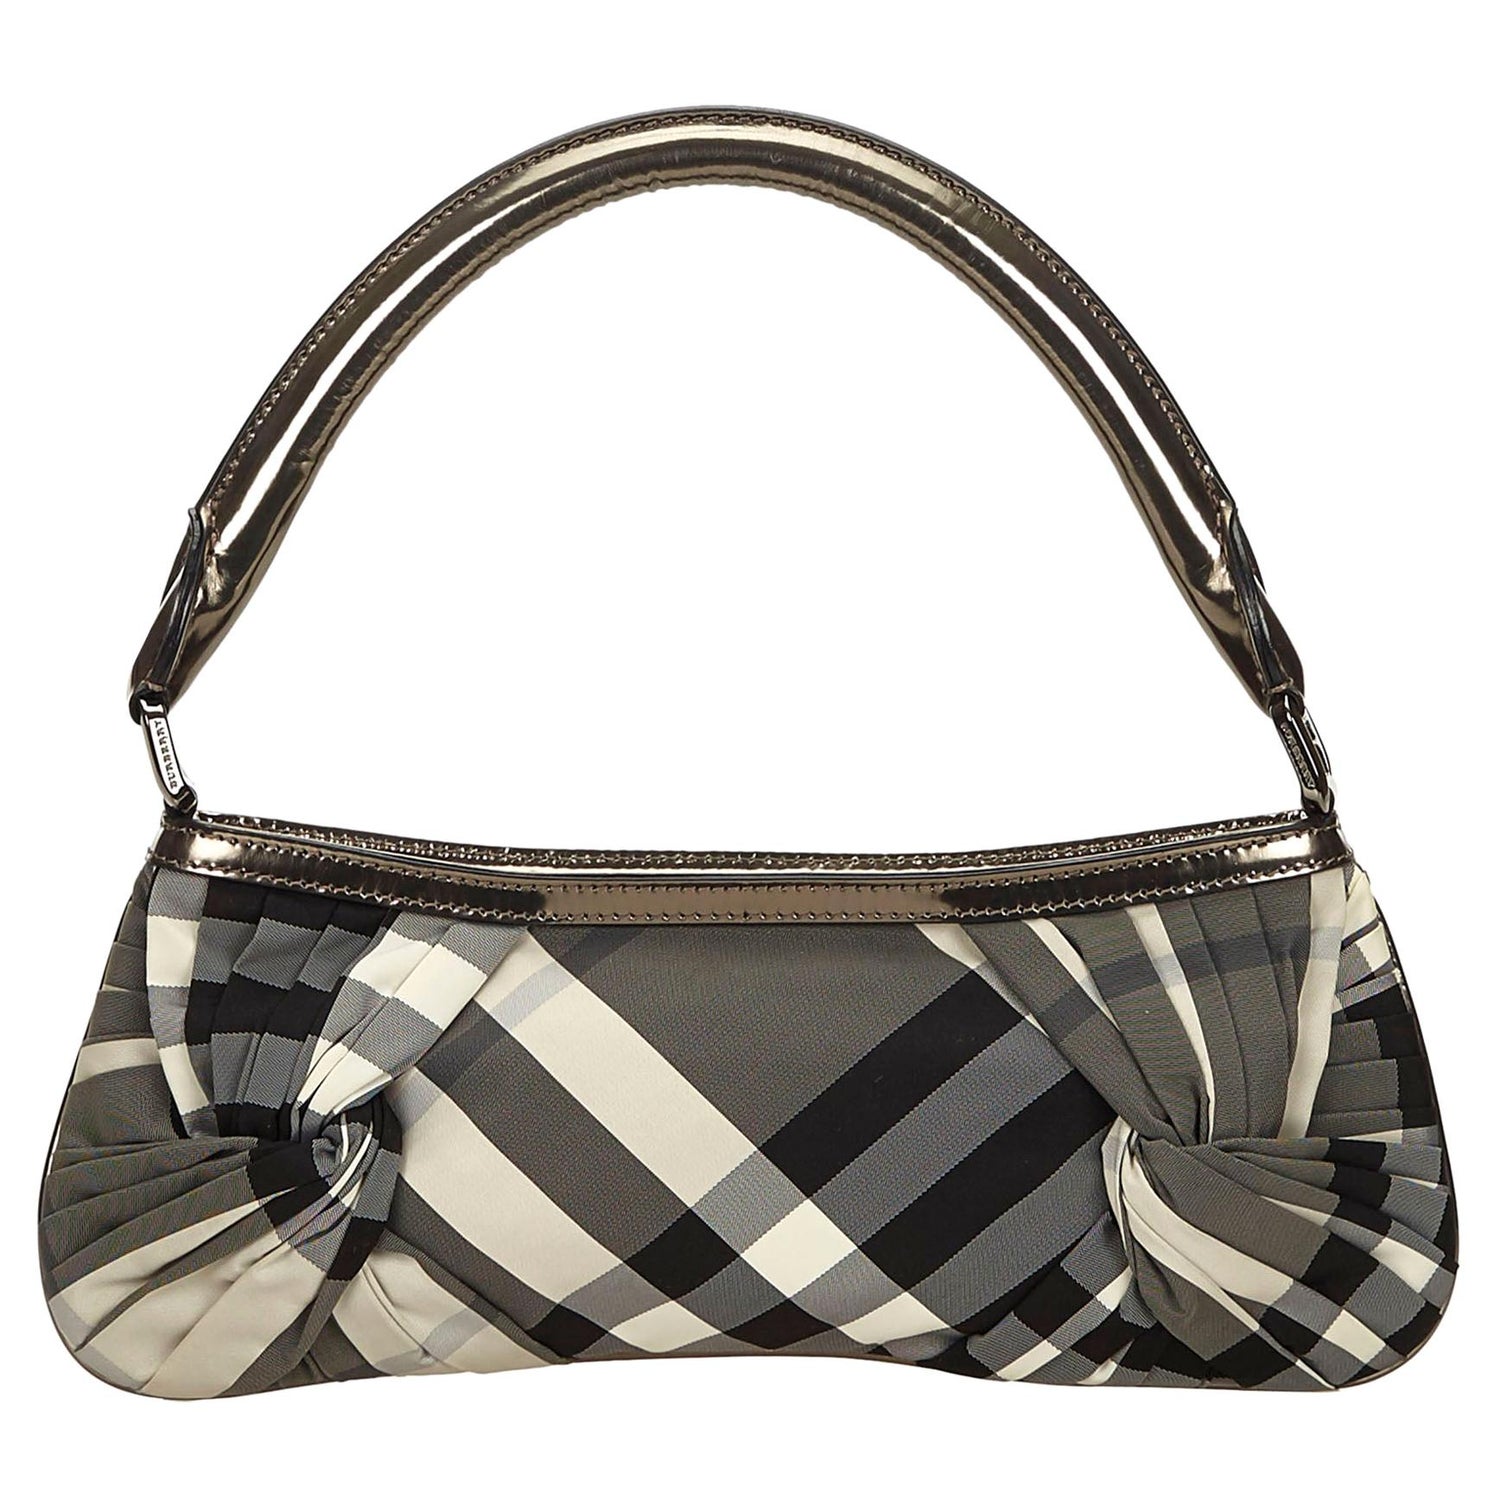 Burberry Baguette - For Sale on 1stDibs | burberry baguette bag, thomas  burberry biography